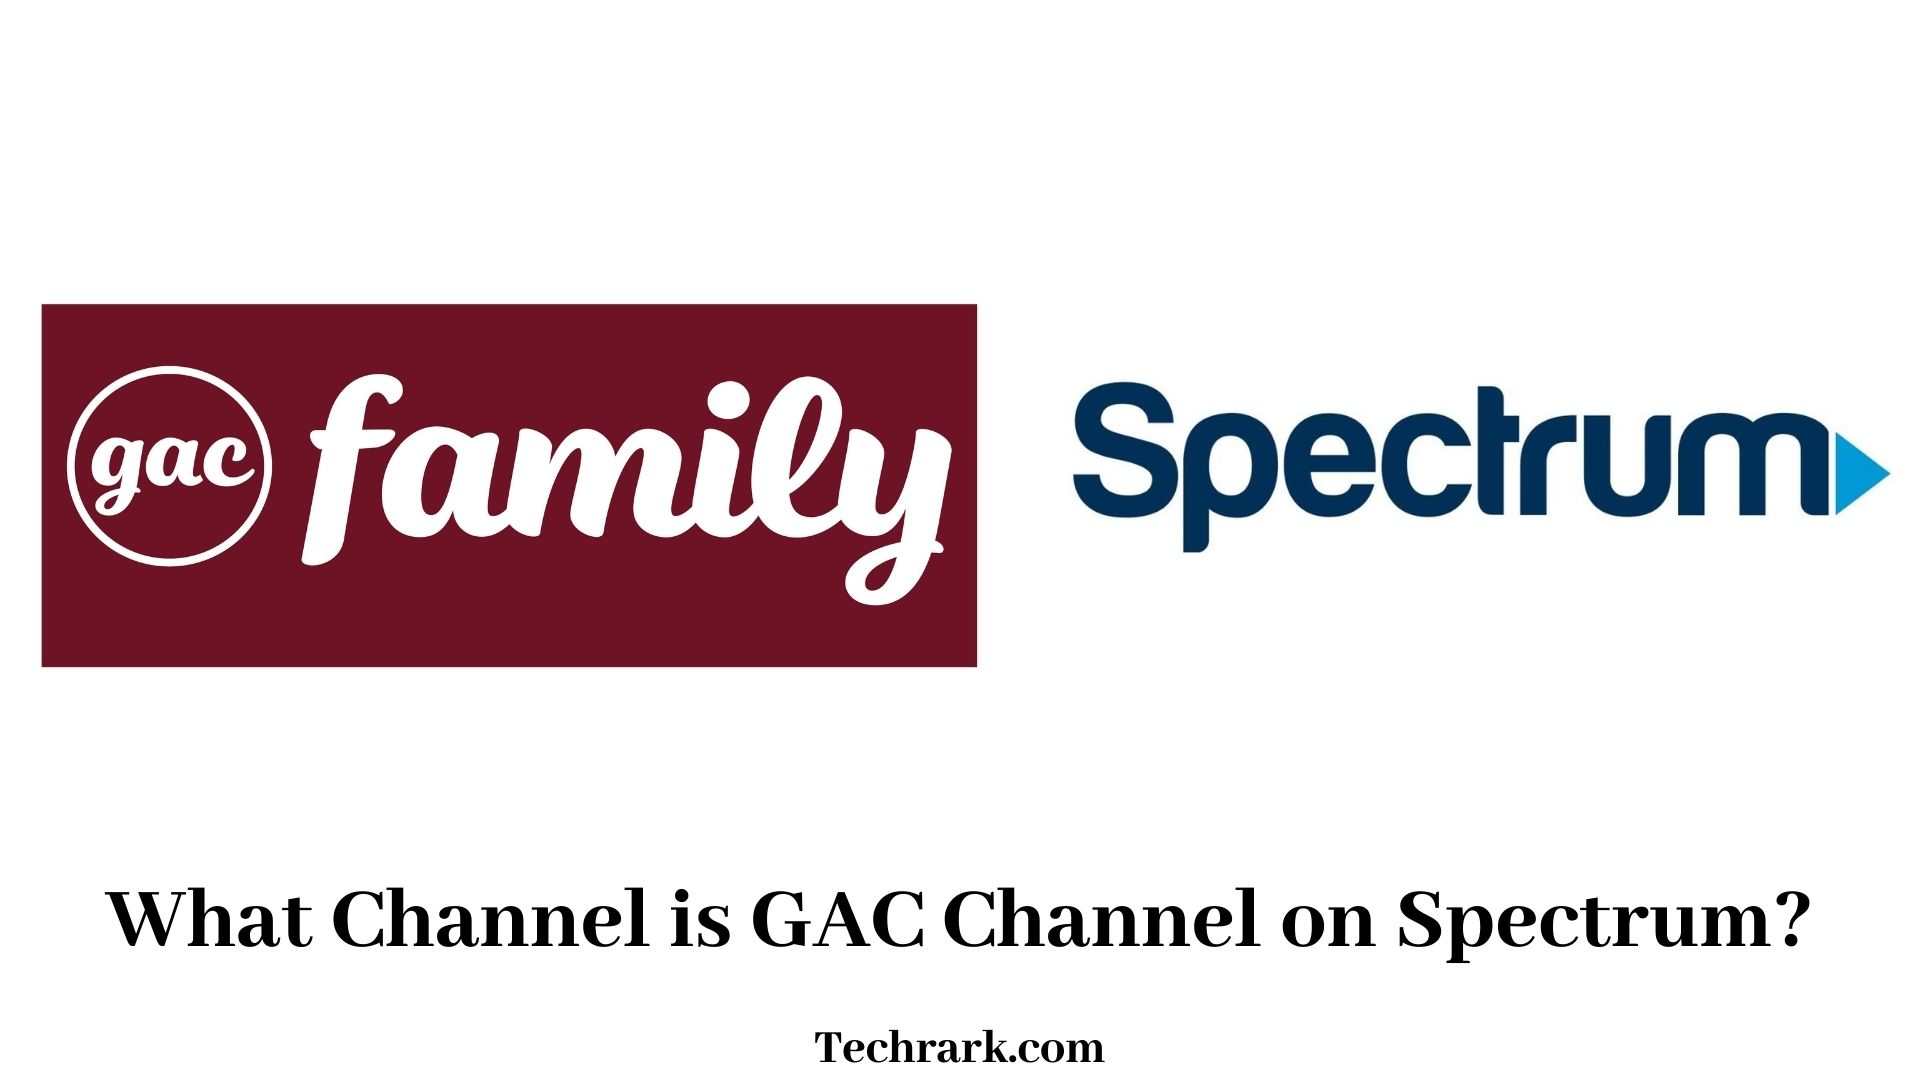 What Channel is GAC Channel on Spectrum